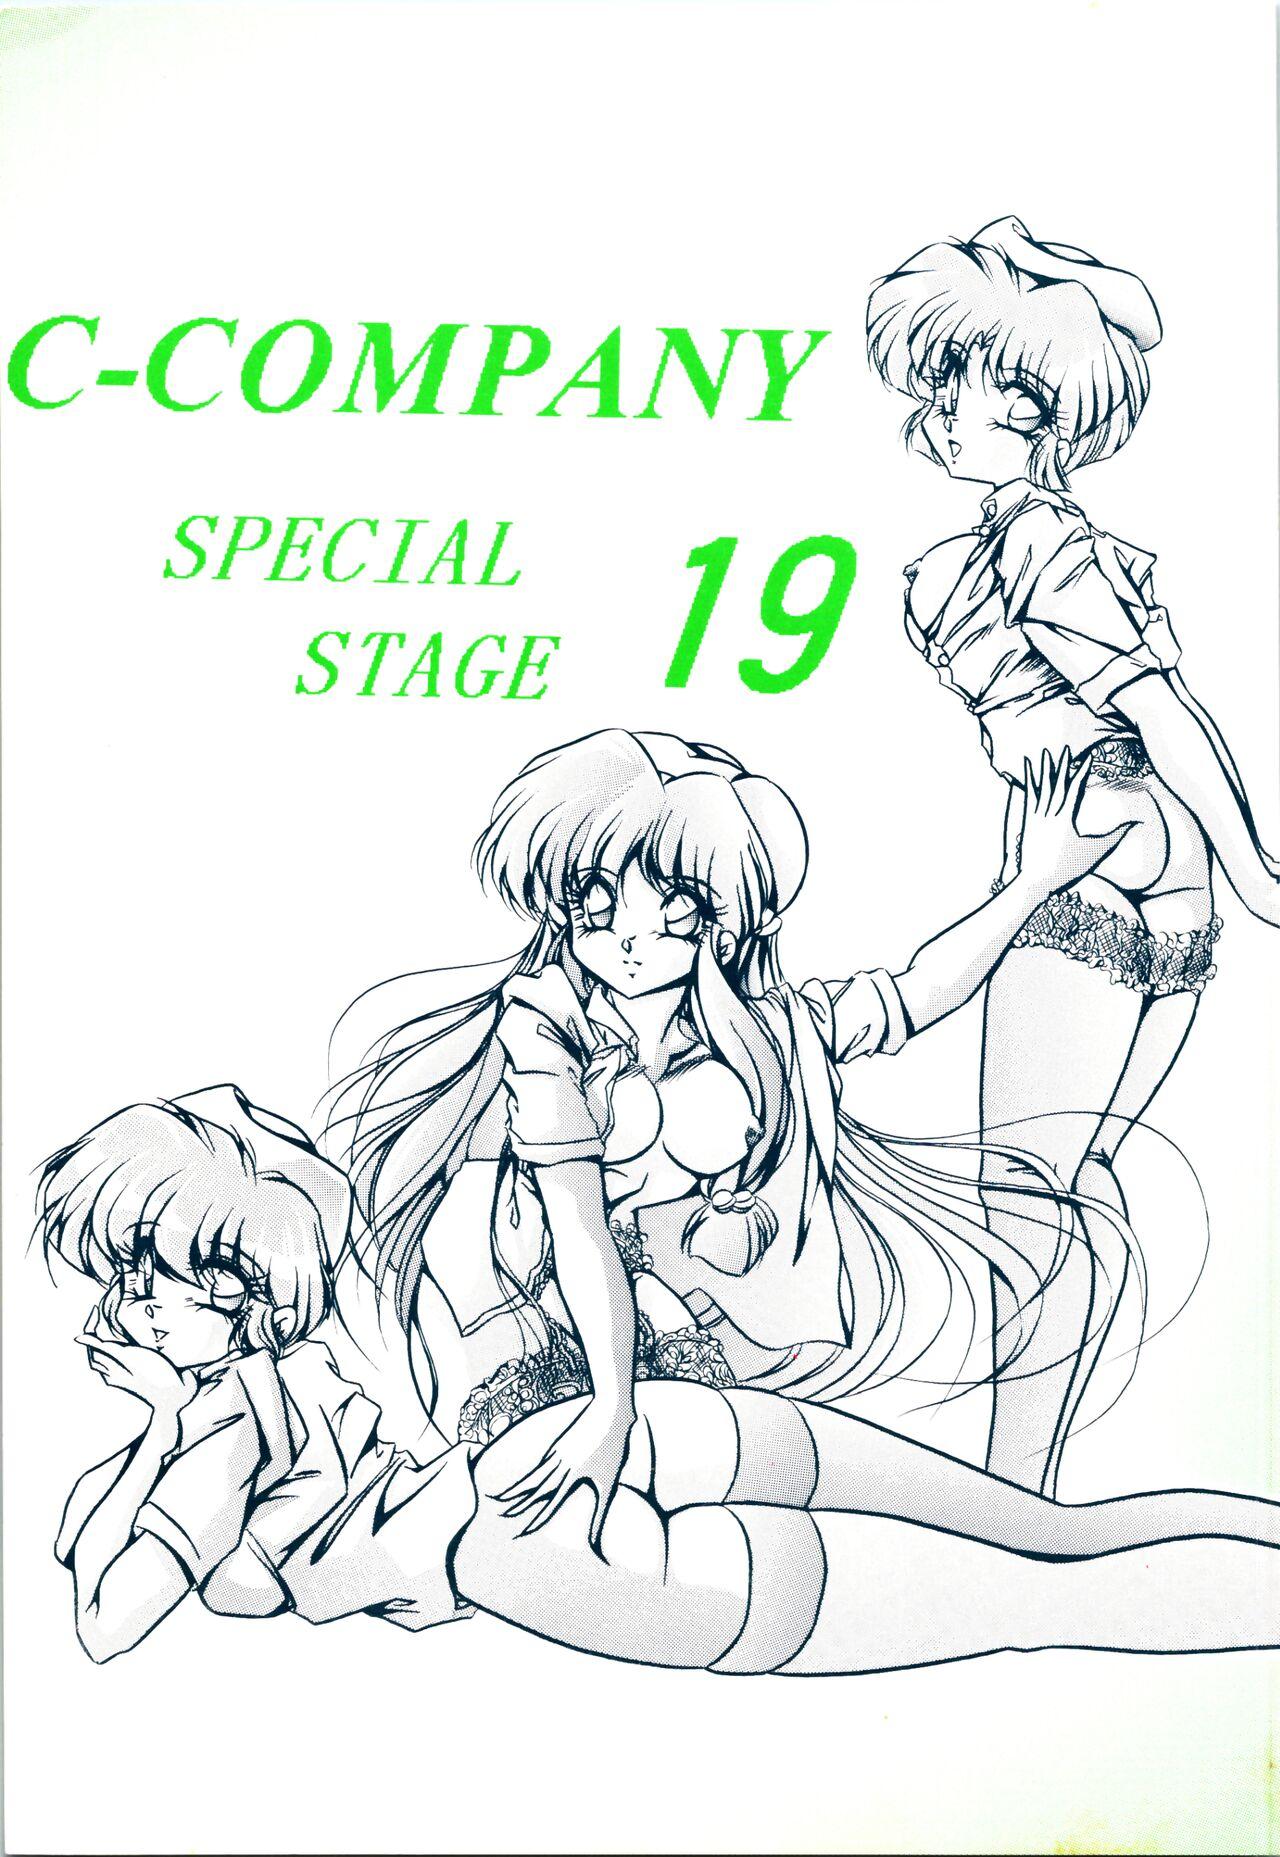 Blackcocks C-COMPANY SPECIAL STAGE 19 - Ranma 12 Amateurs Gone Wild - Page 1